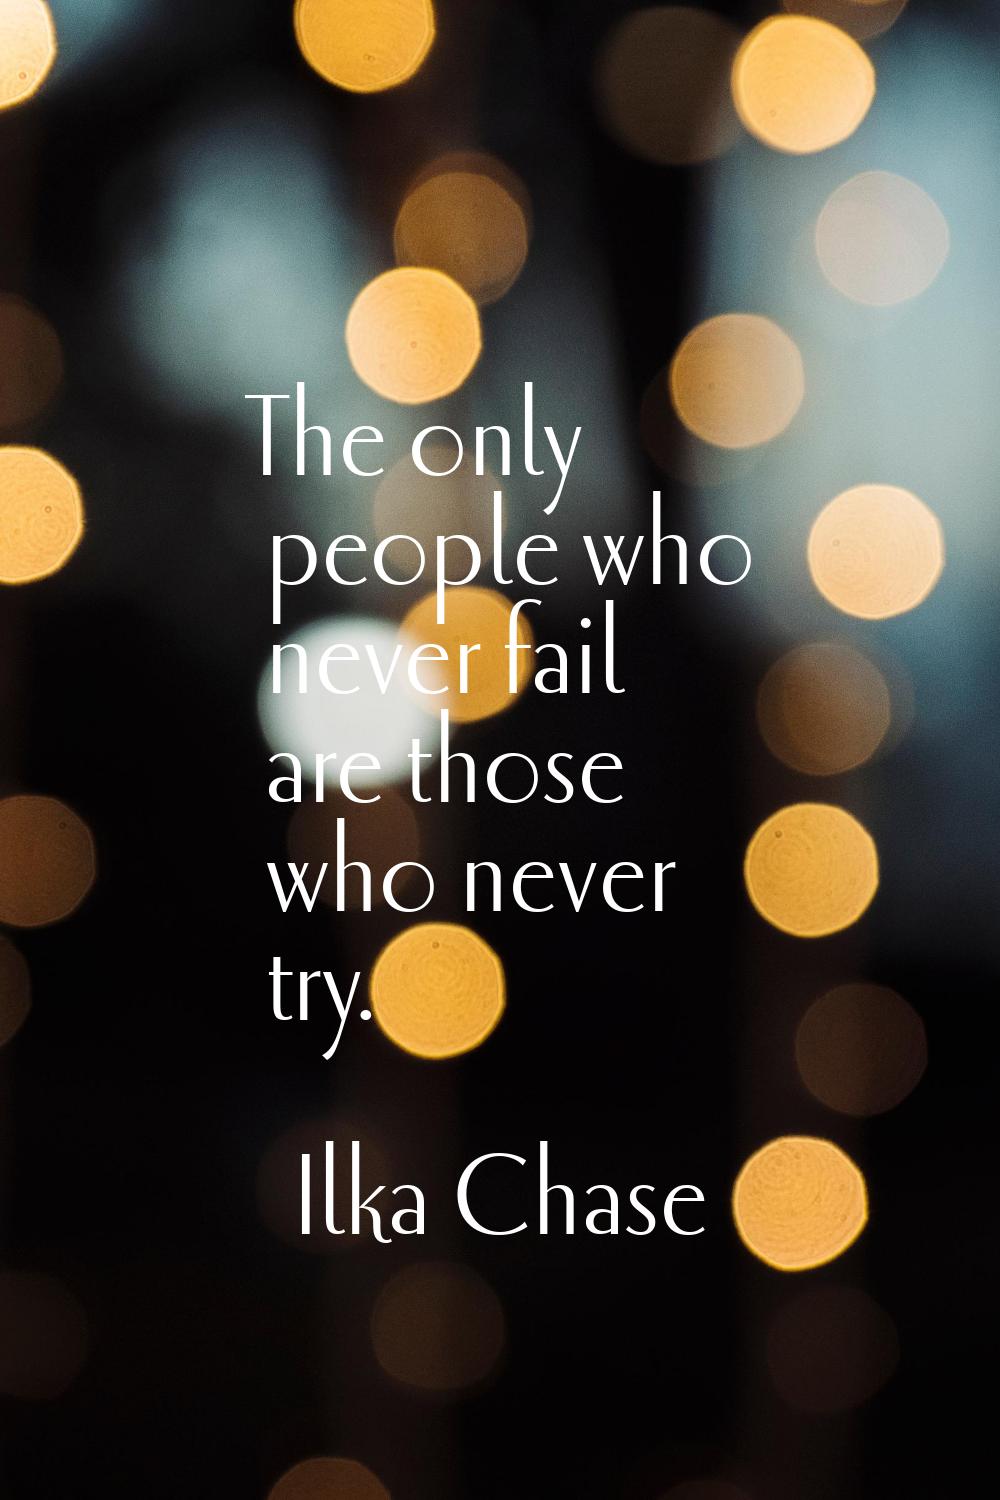 The only people who never fail are those who never try.